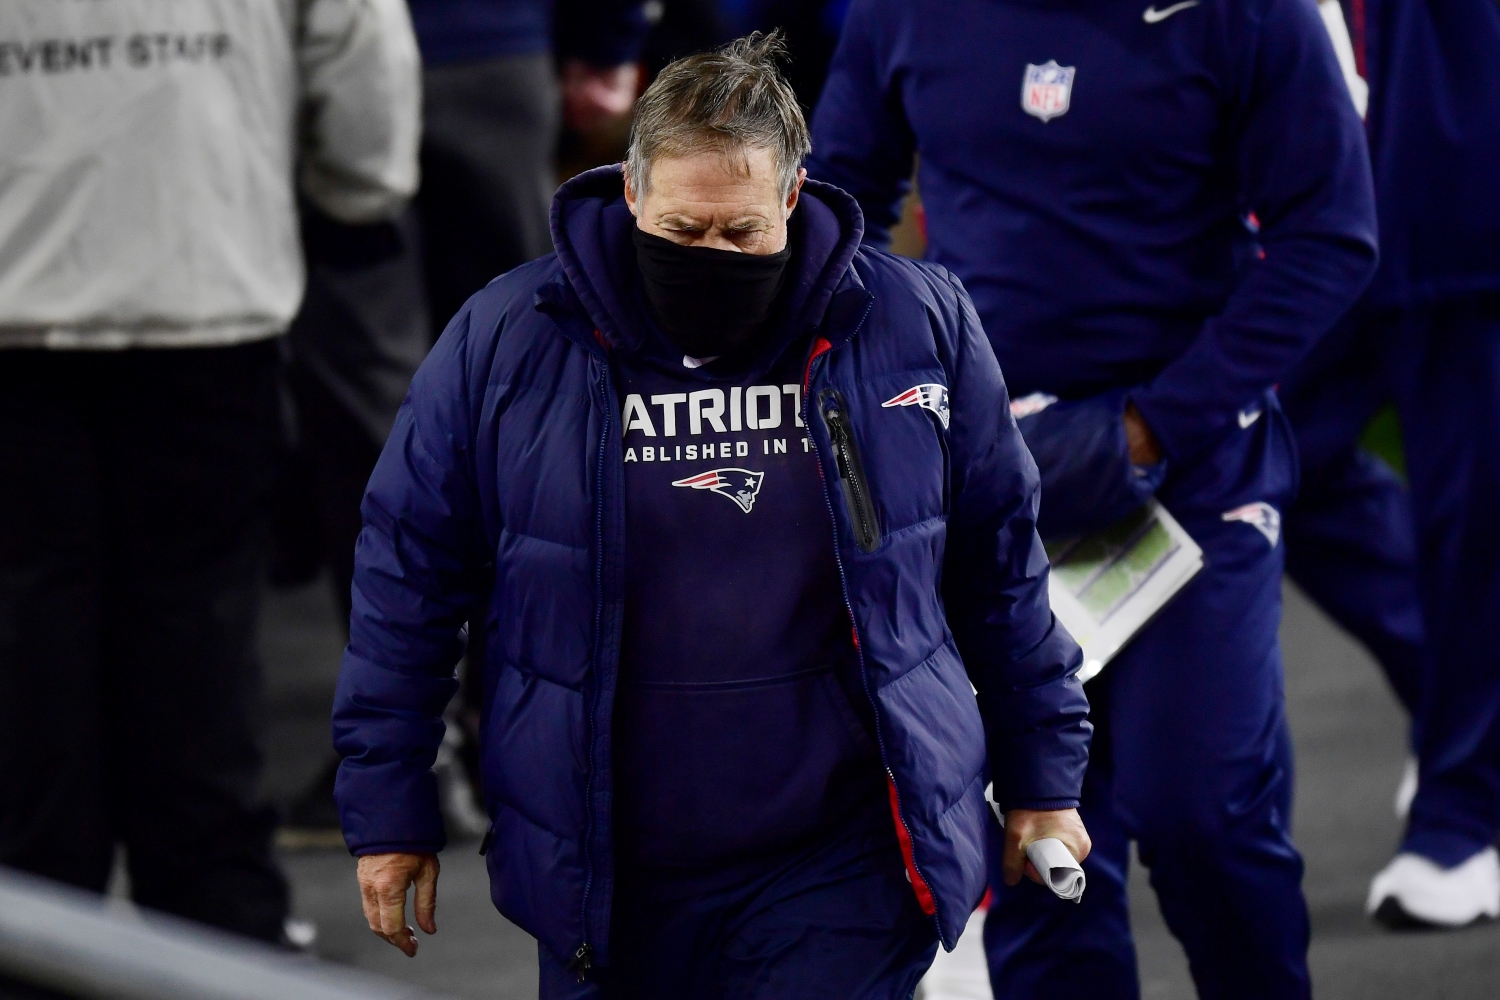 New England Patriots head coach Bill Belichick looks down on the sidelines during a game.